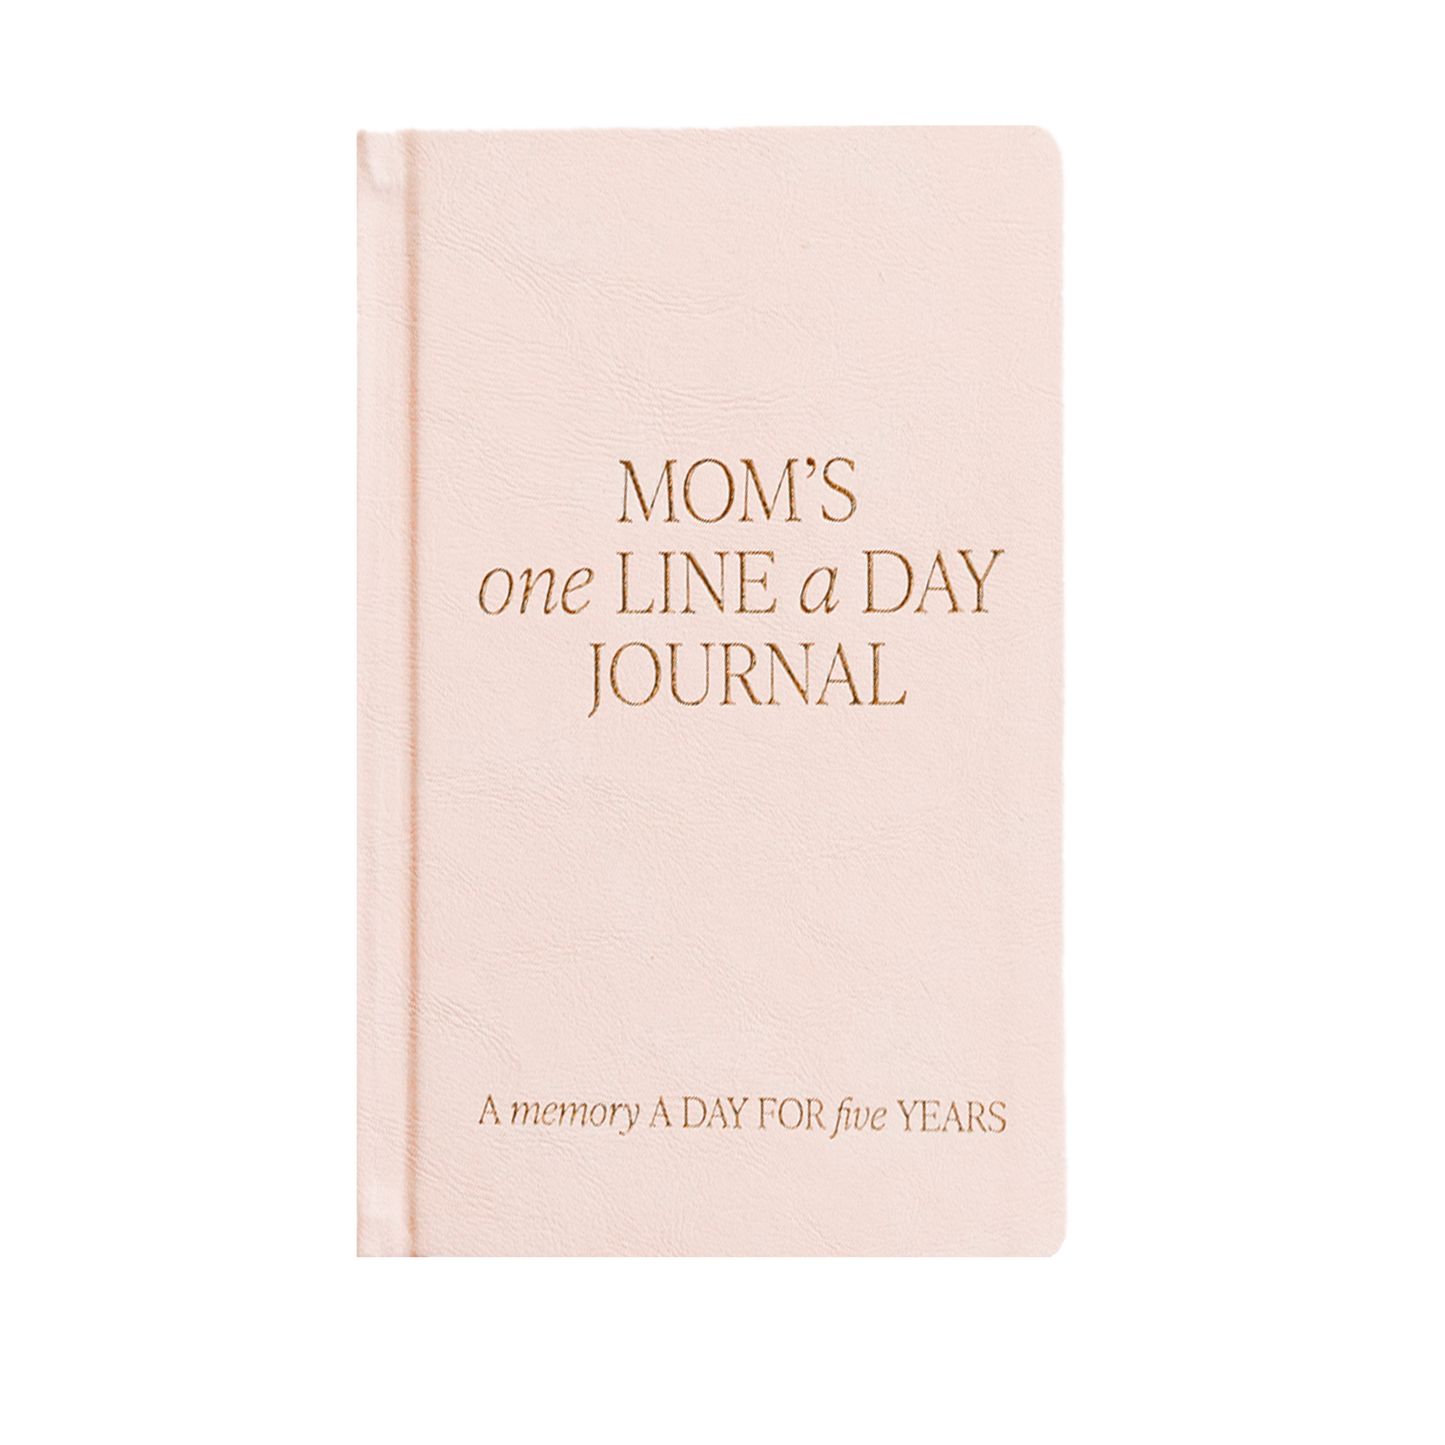 MOM'S one LINE a DAY Fabric Journal